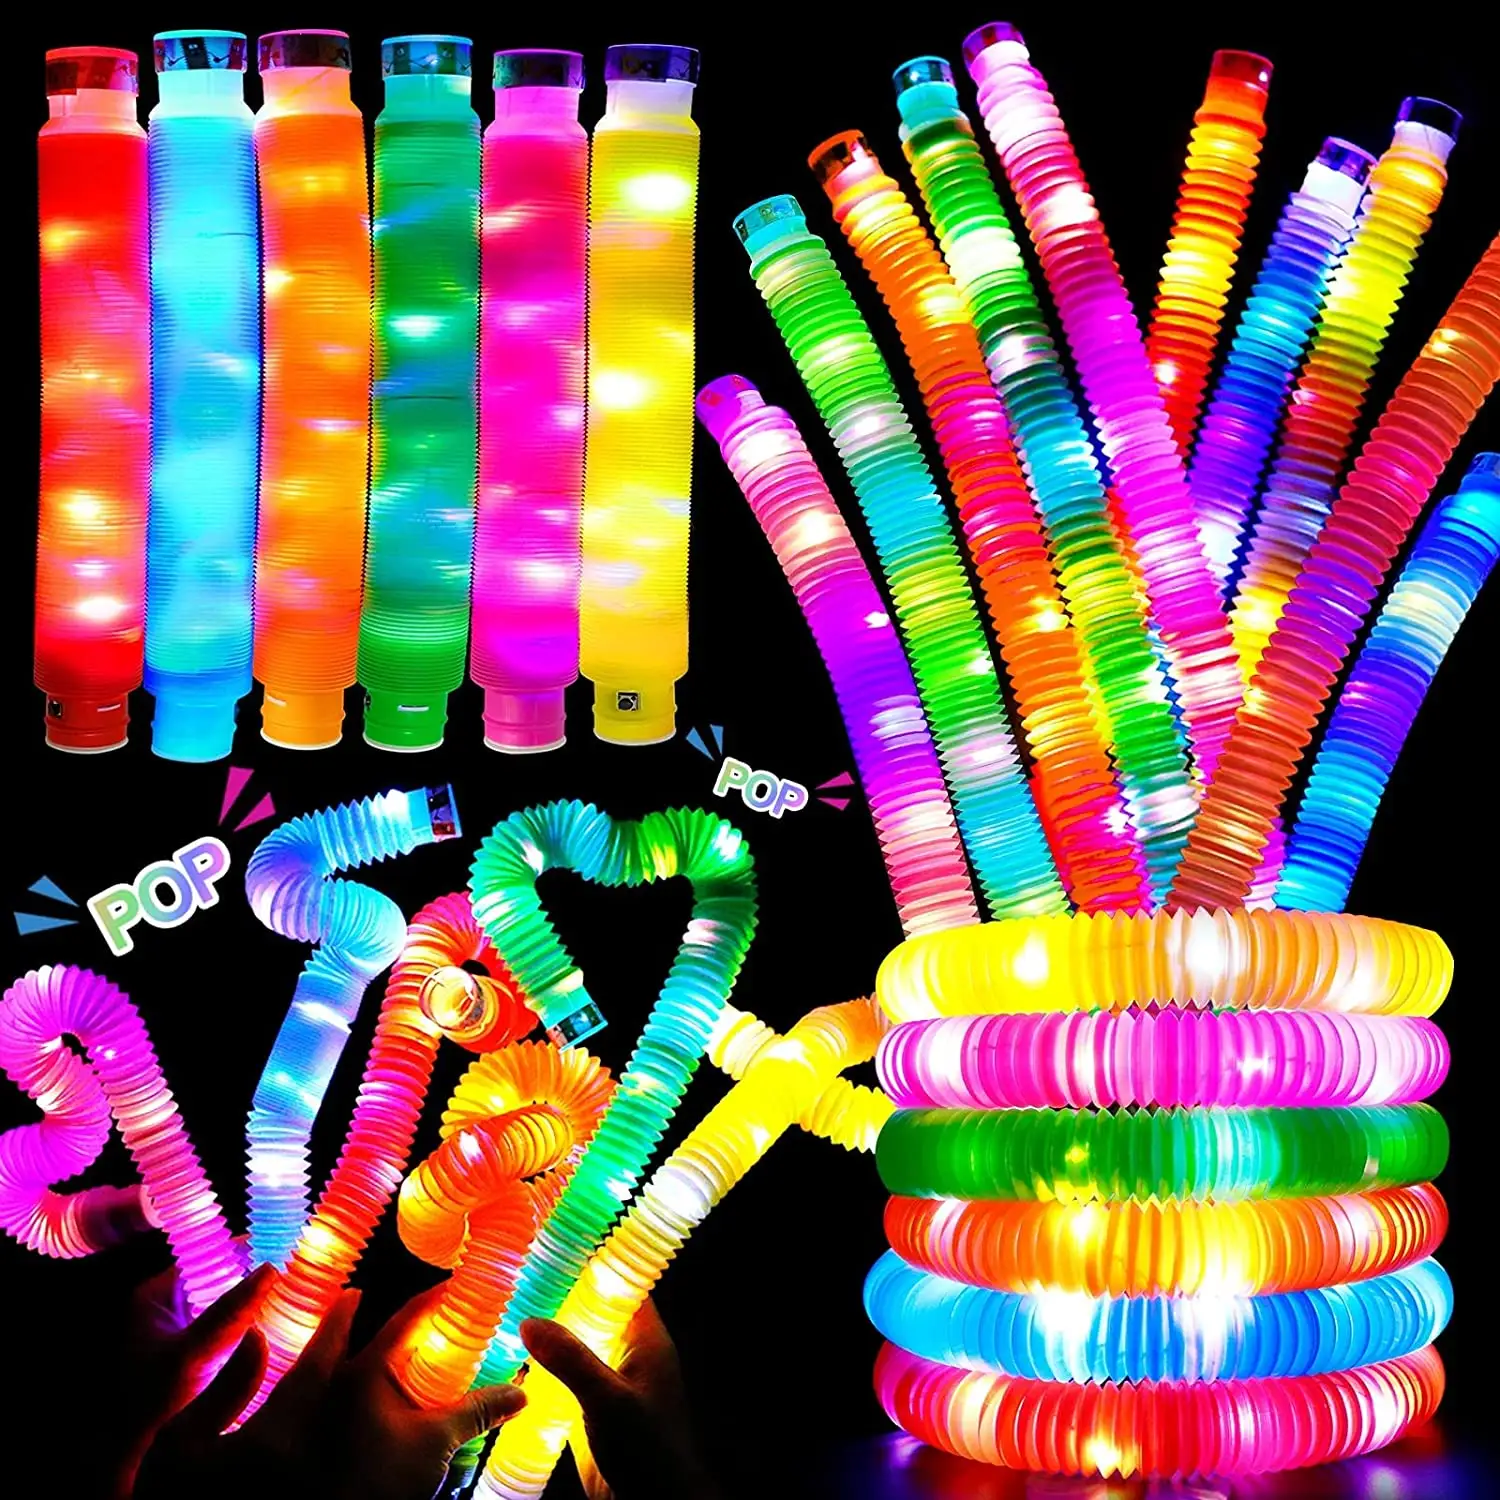 FTZ plastic Fidget Pop Tube Toys for Kids with ADHD and ADD and Adults Pipe Sensory Tools Fidget Sensory Led Light up Pop Tubes